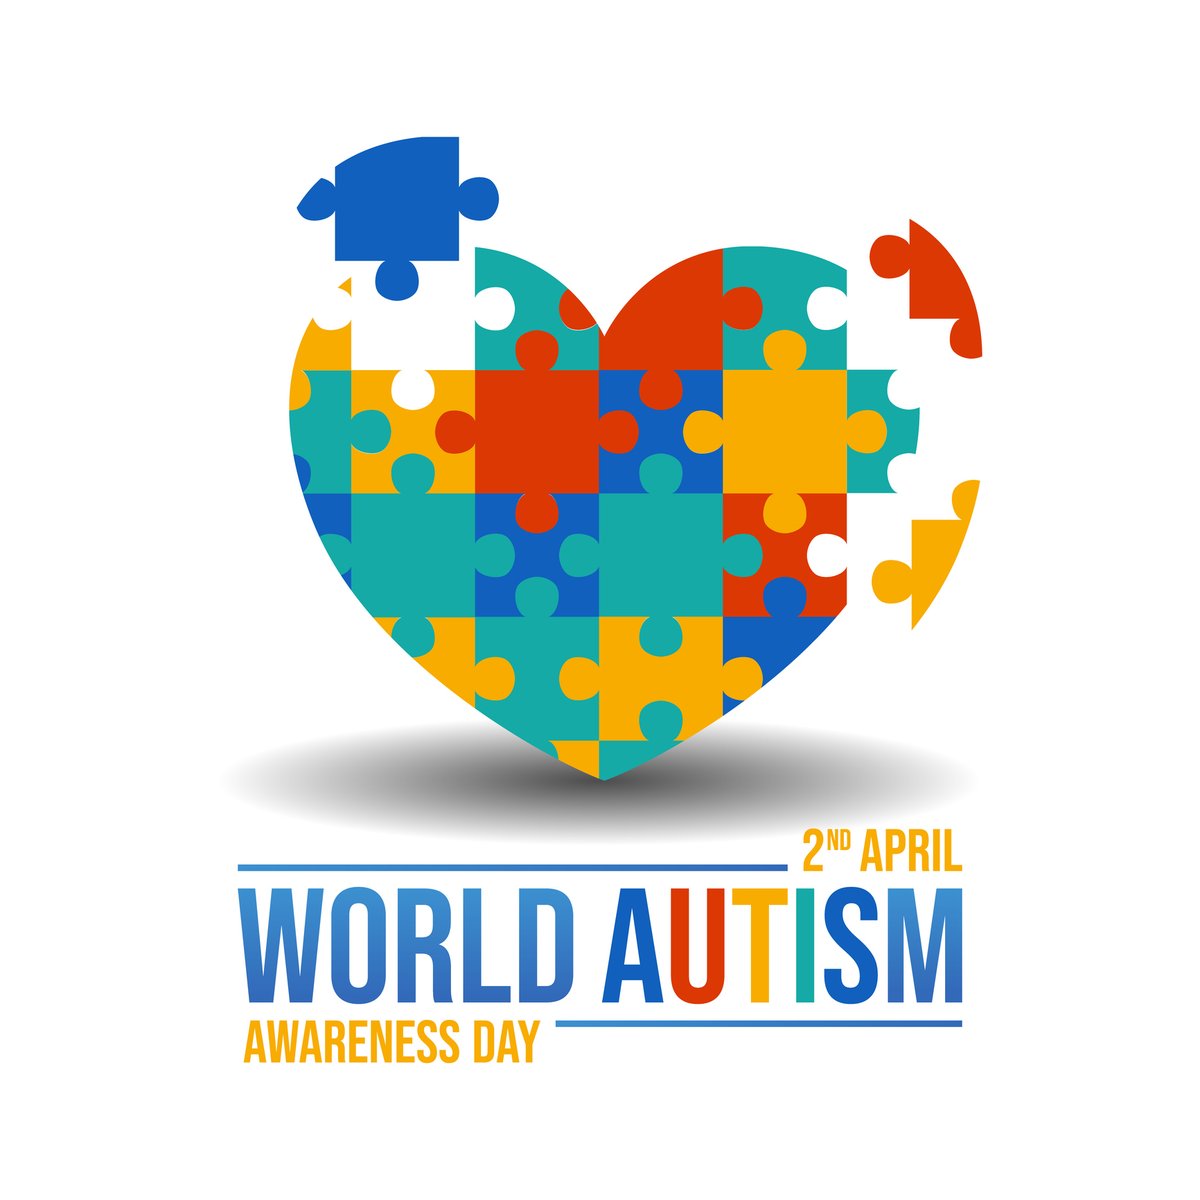 Today is the 17th annual #WorldAutismDay, and this year’s theme is an encouragement to act fearlessly for change. Researchers can access the #PCORnet infrastructure to conduct further research and create change in health care for individuals with #autism: bit.ly/3wWjTB7